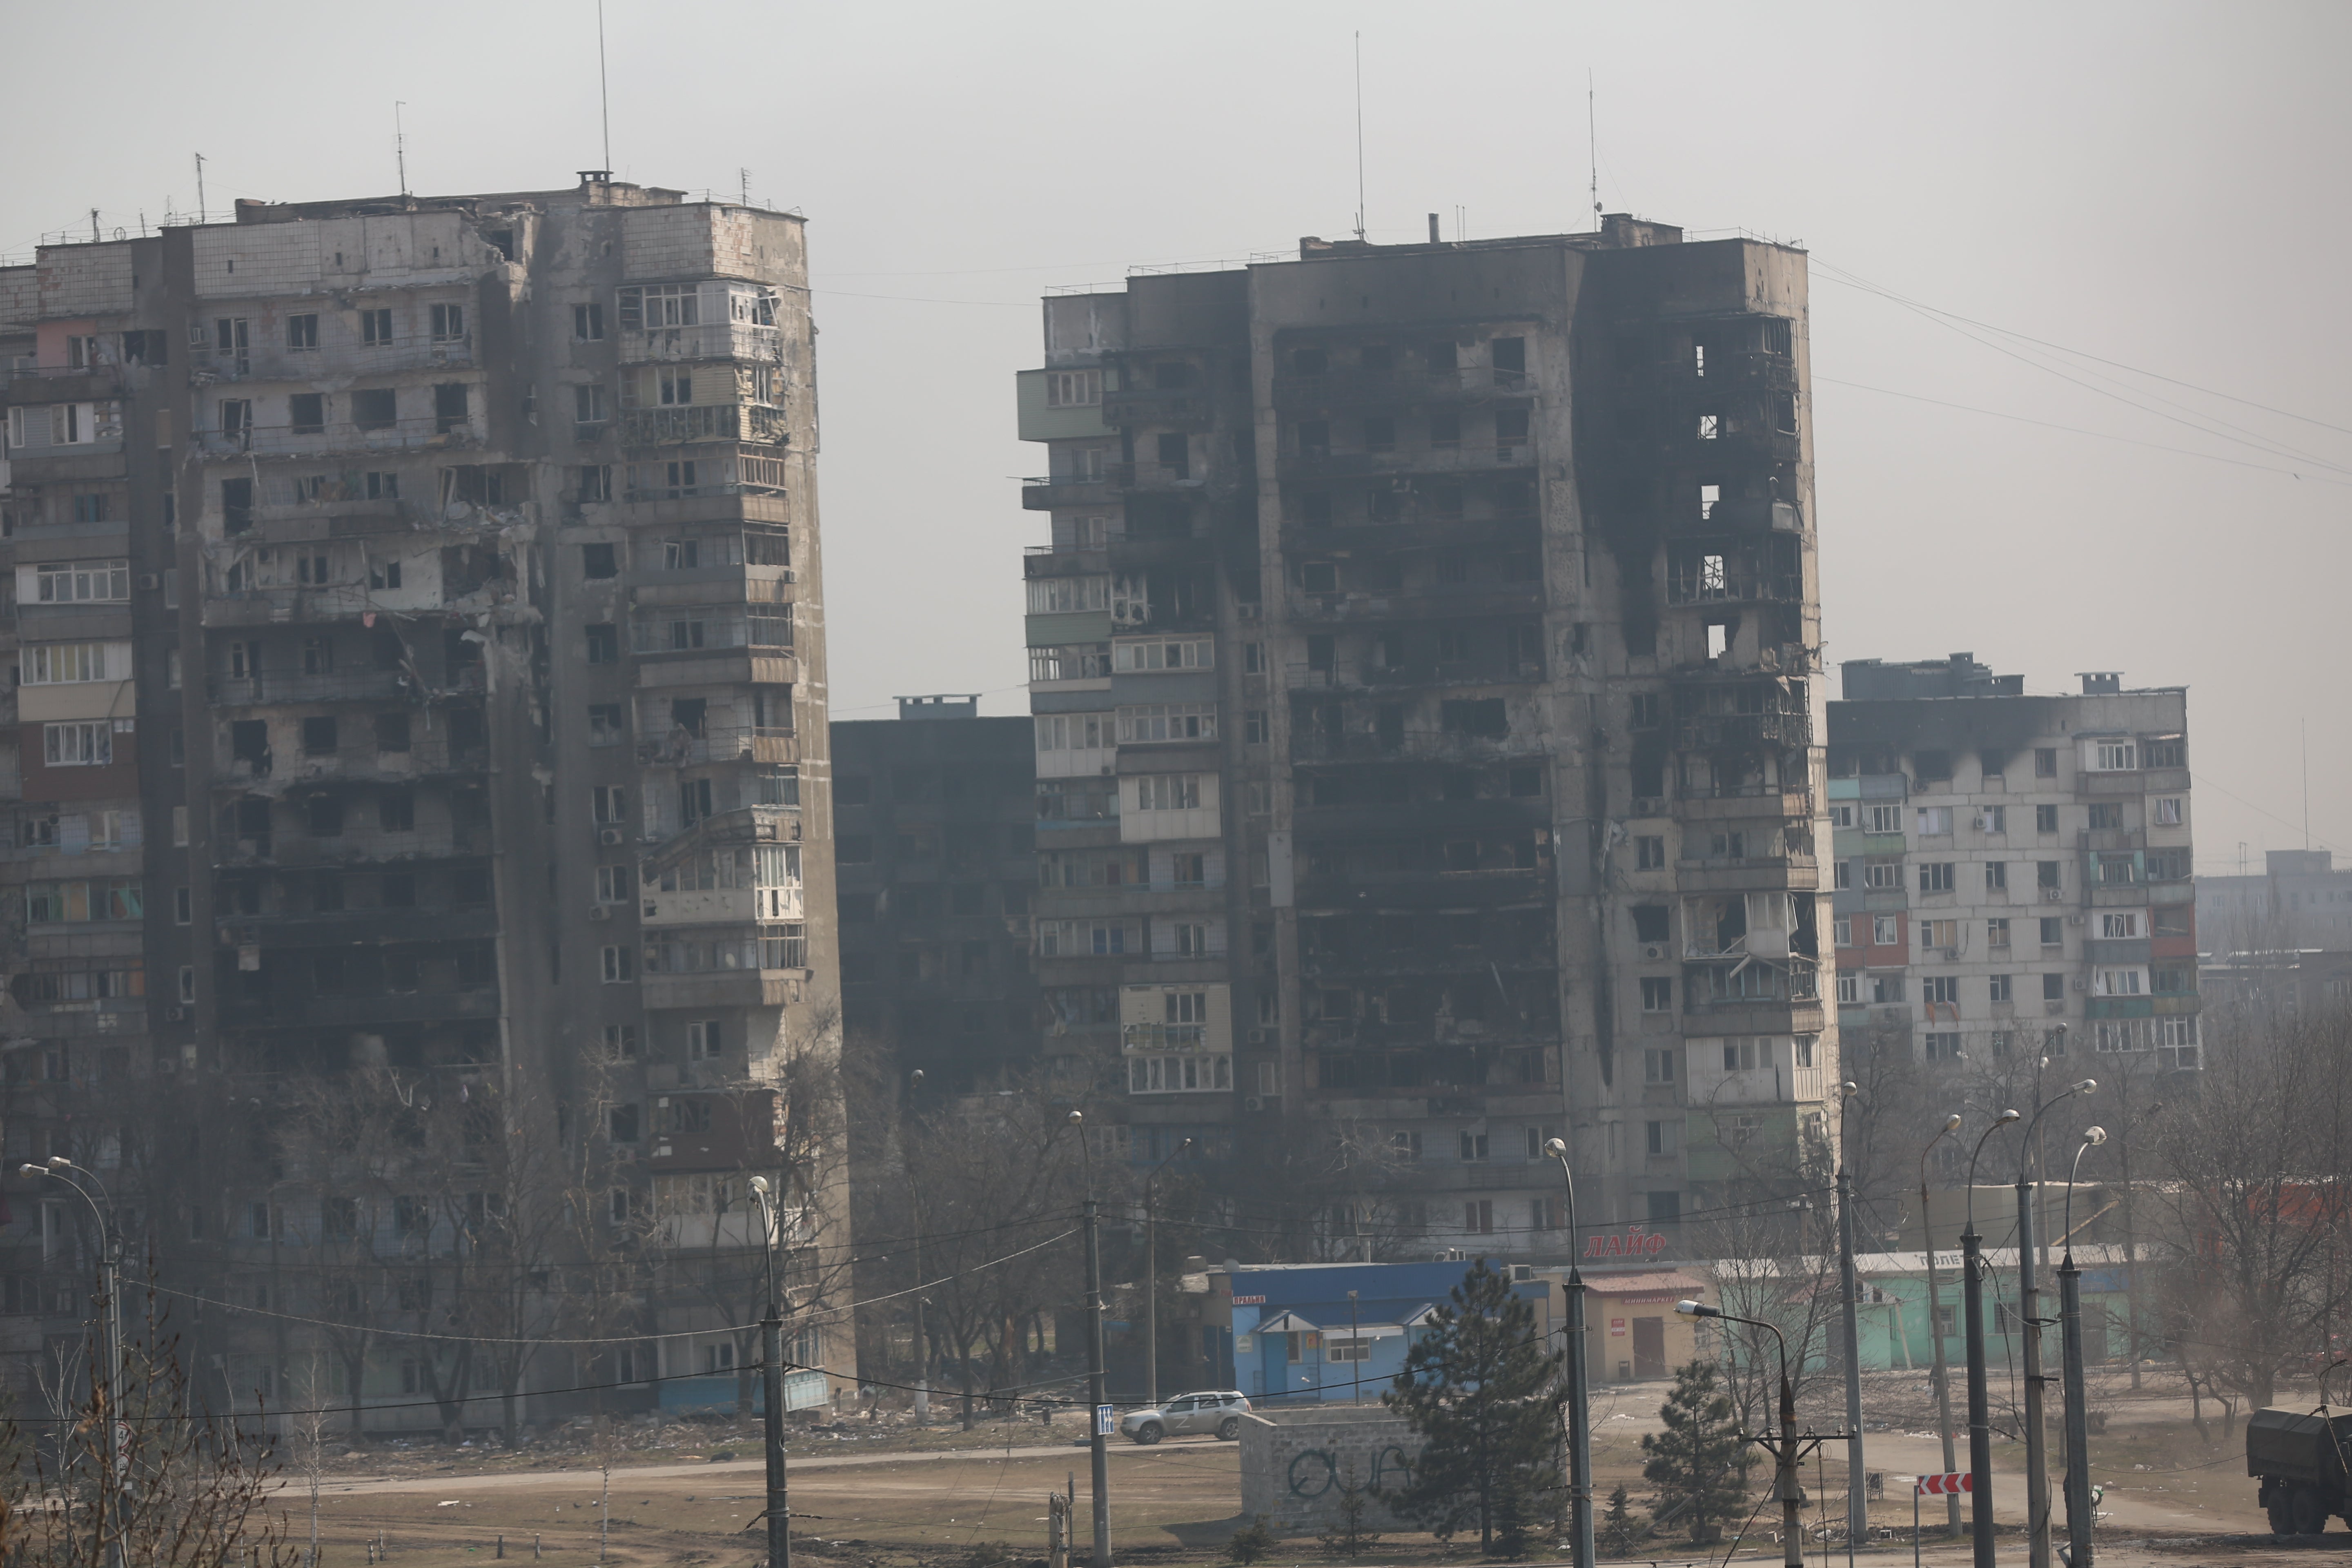 Damaged buildings in Mariupol, from where civilians are being evacuated along humanitarian corridors